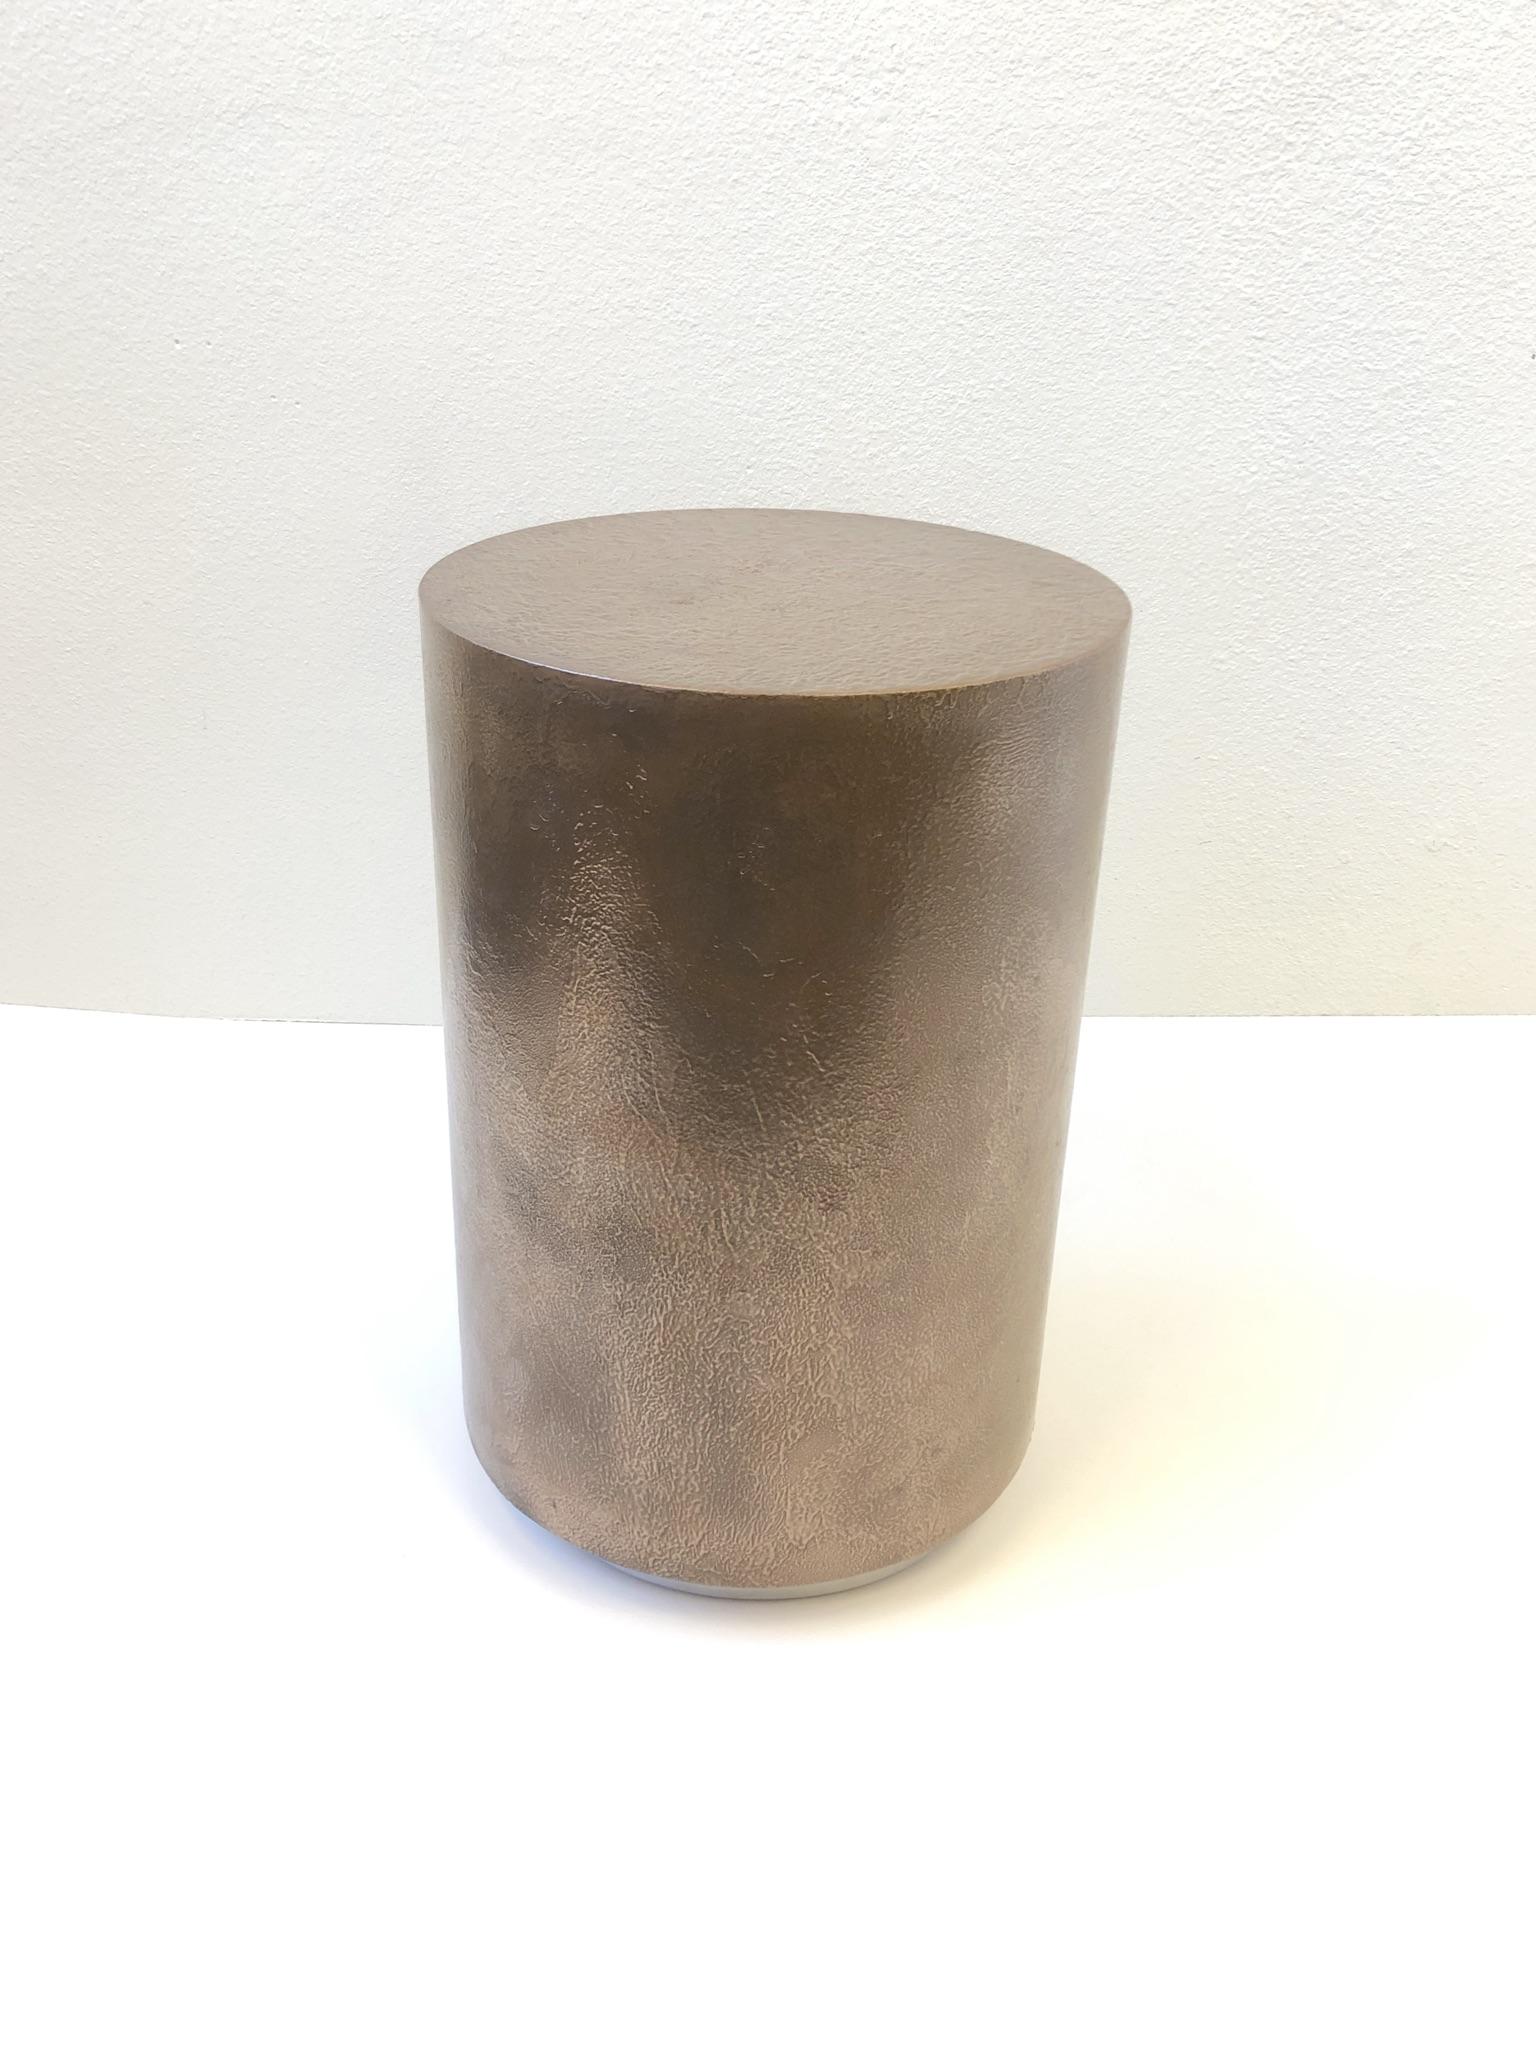 A 1980s drum occasional table by Steve Chase. The table is constructed of wood with a custom texture aged bronze finish and a polished chrome base. 
Measures: 23.25” high 15.25” diameter.